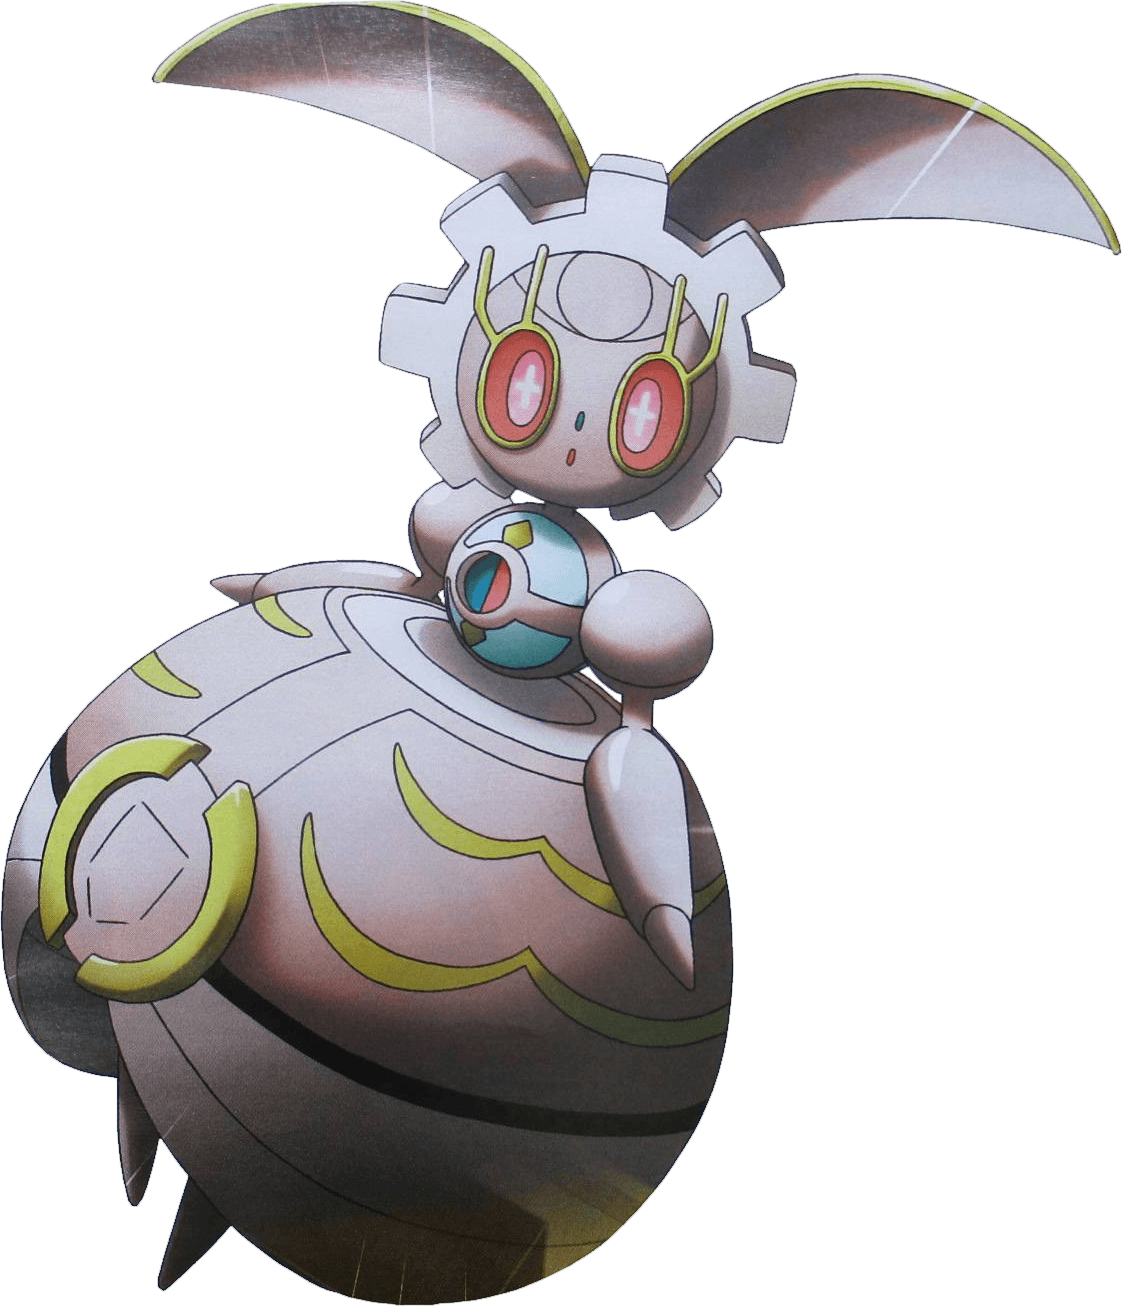 Magearna brand new Pokemon! Check it out here!